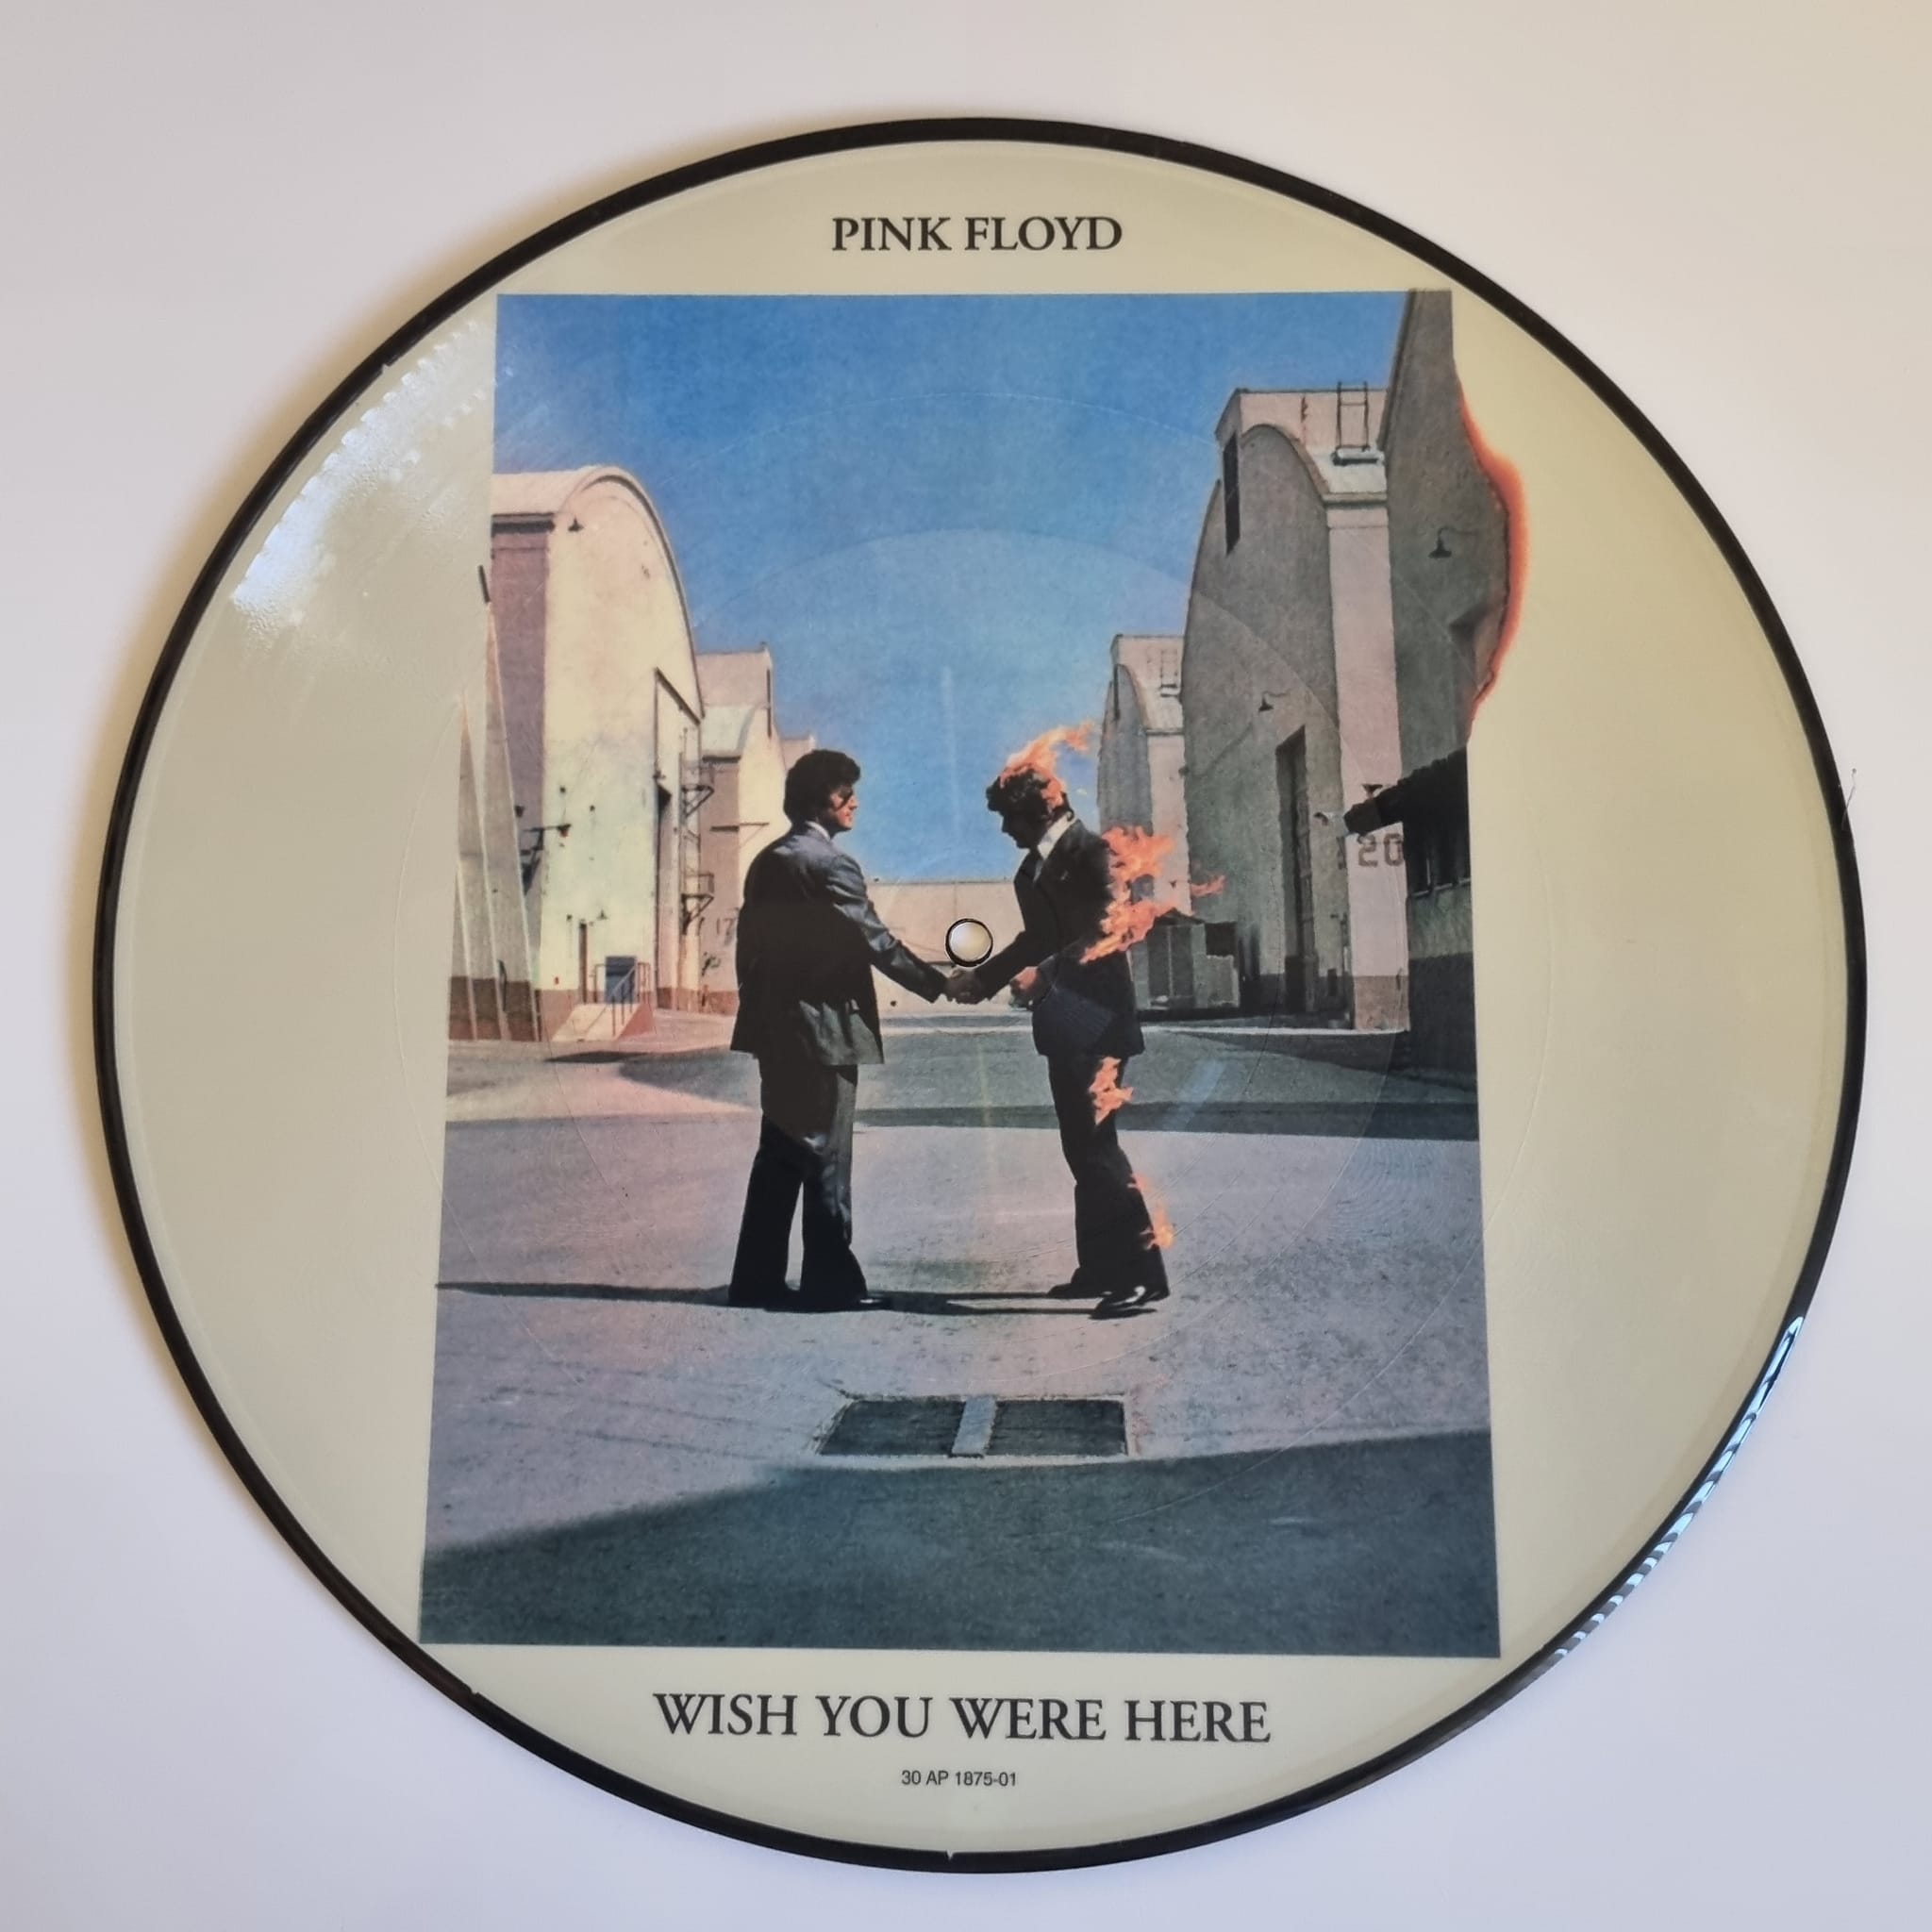 Pink Floyd Wish You Were Here Picture Disc Lp Record Vinyl Rock Vinyl Revival